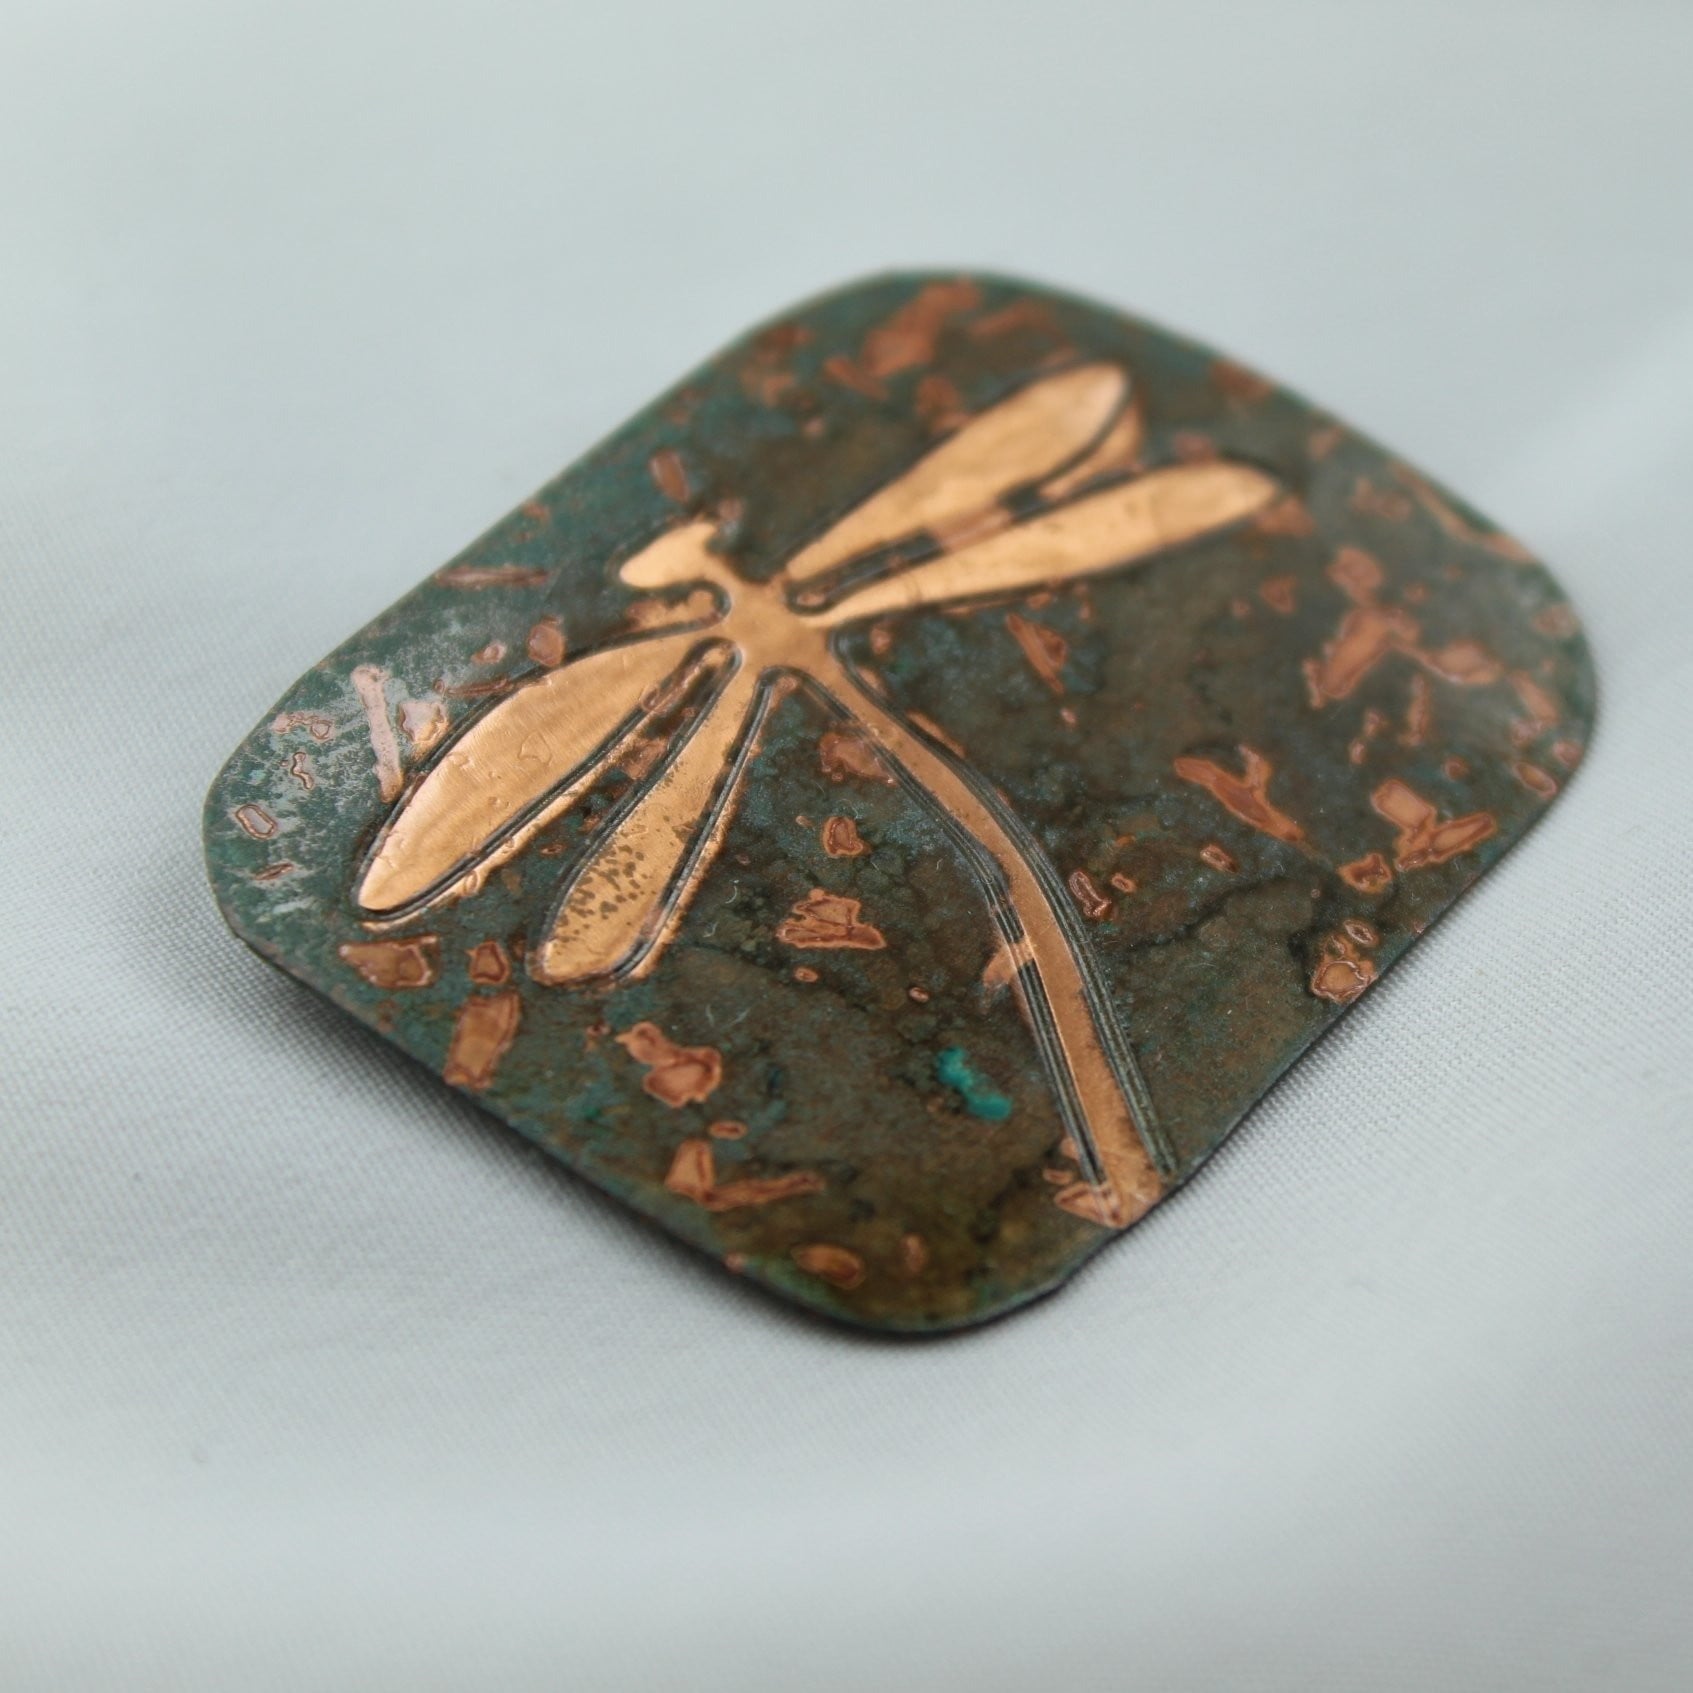 Dragonfly Copper Verdigris Pin Artisan OOAK one of kind